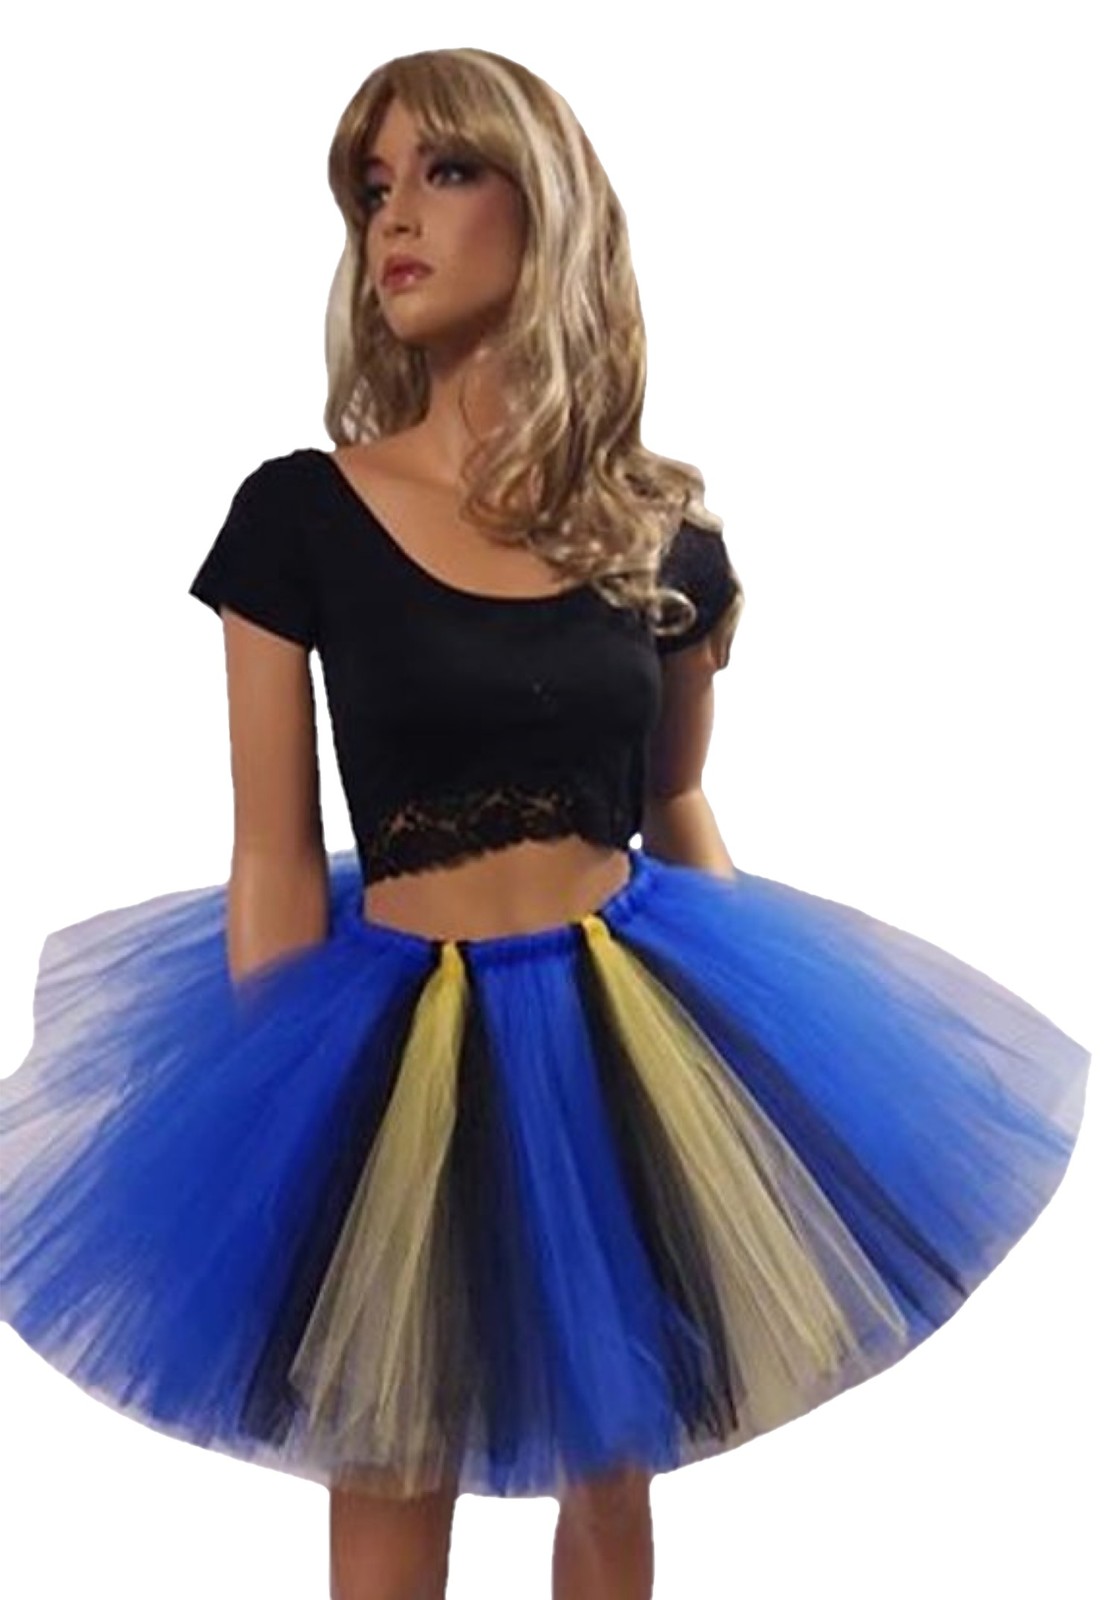 Dory the Fish Tutu Skirt - Adult and Child Sizes Available